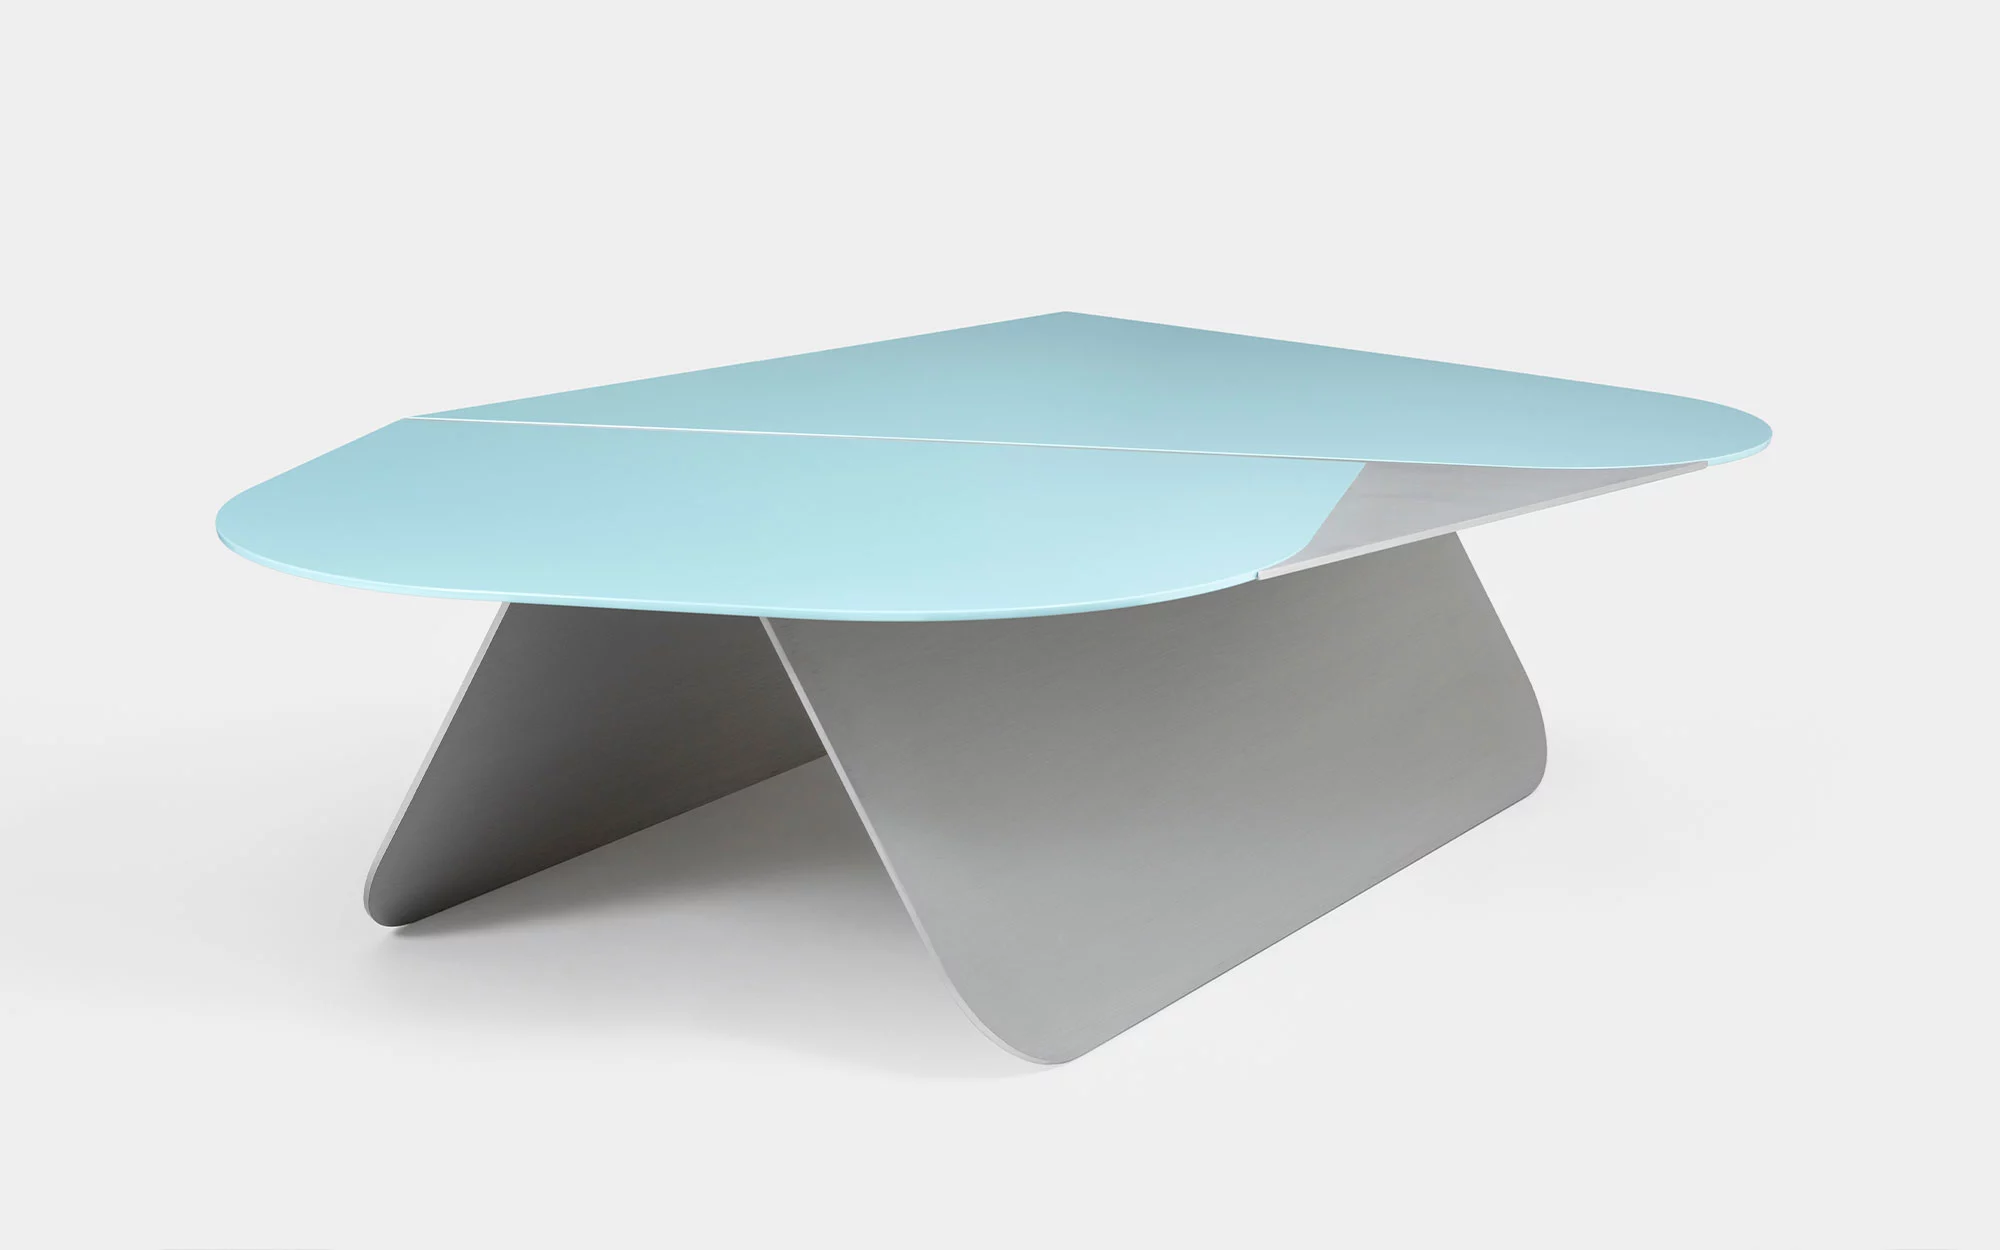 Large DB Coffee Table - Pierre Charpin - Art and Drawing - Galerie kreo